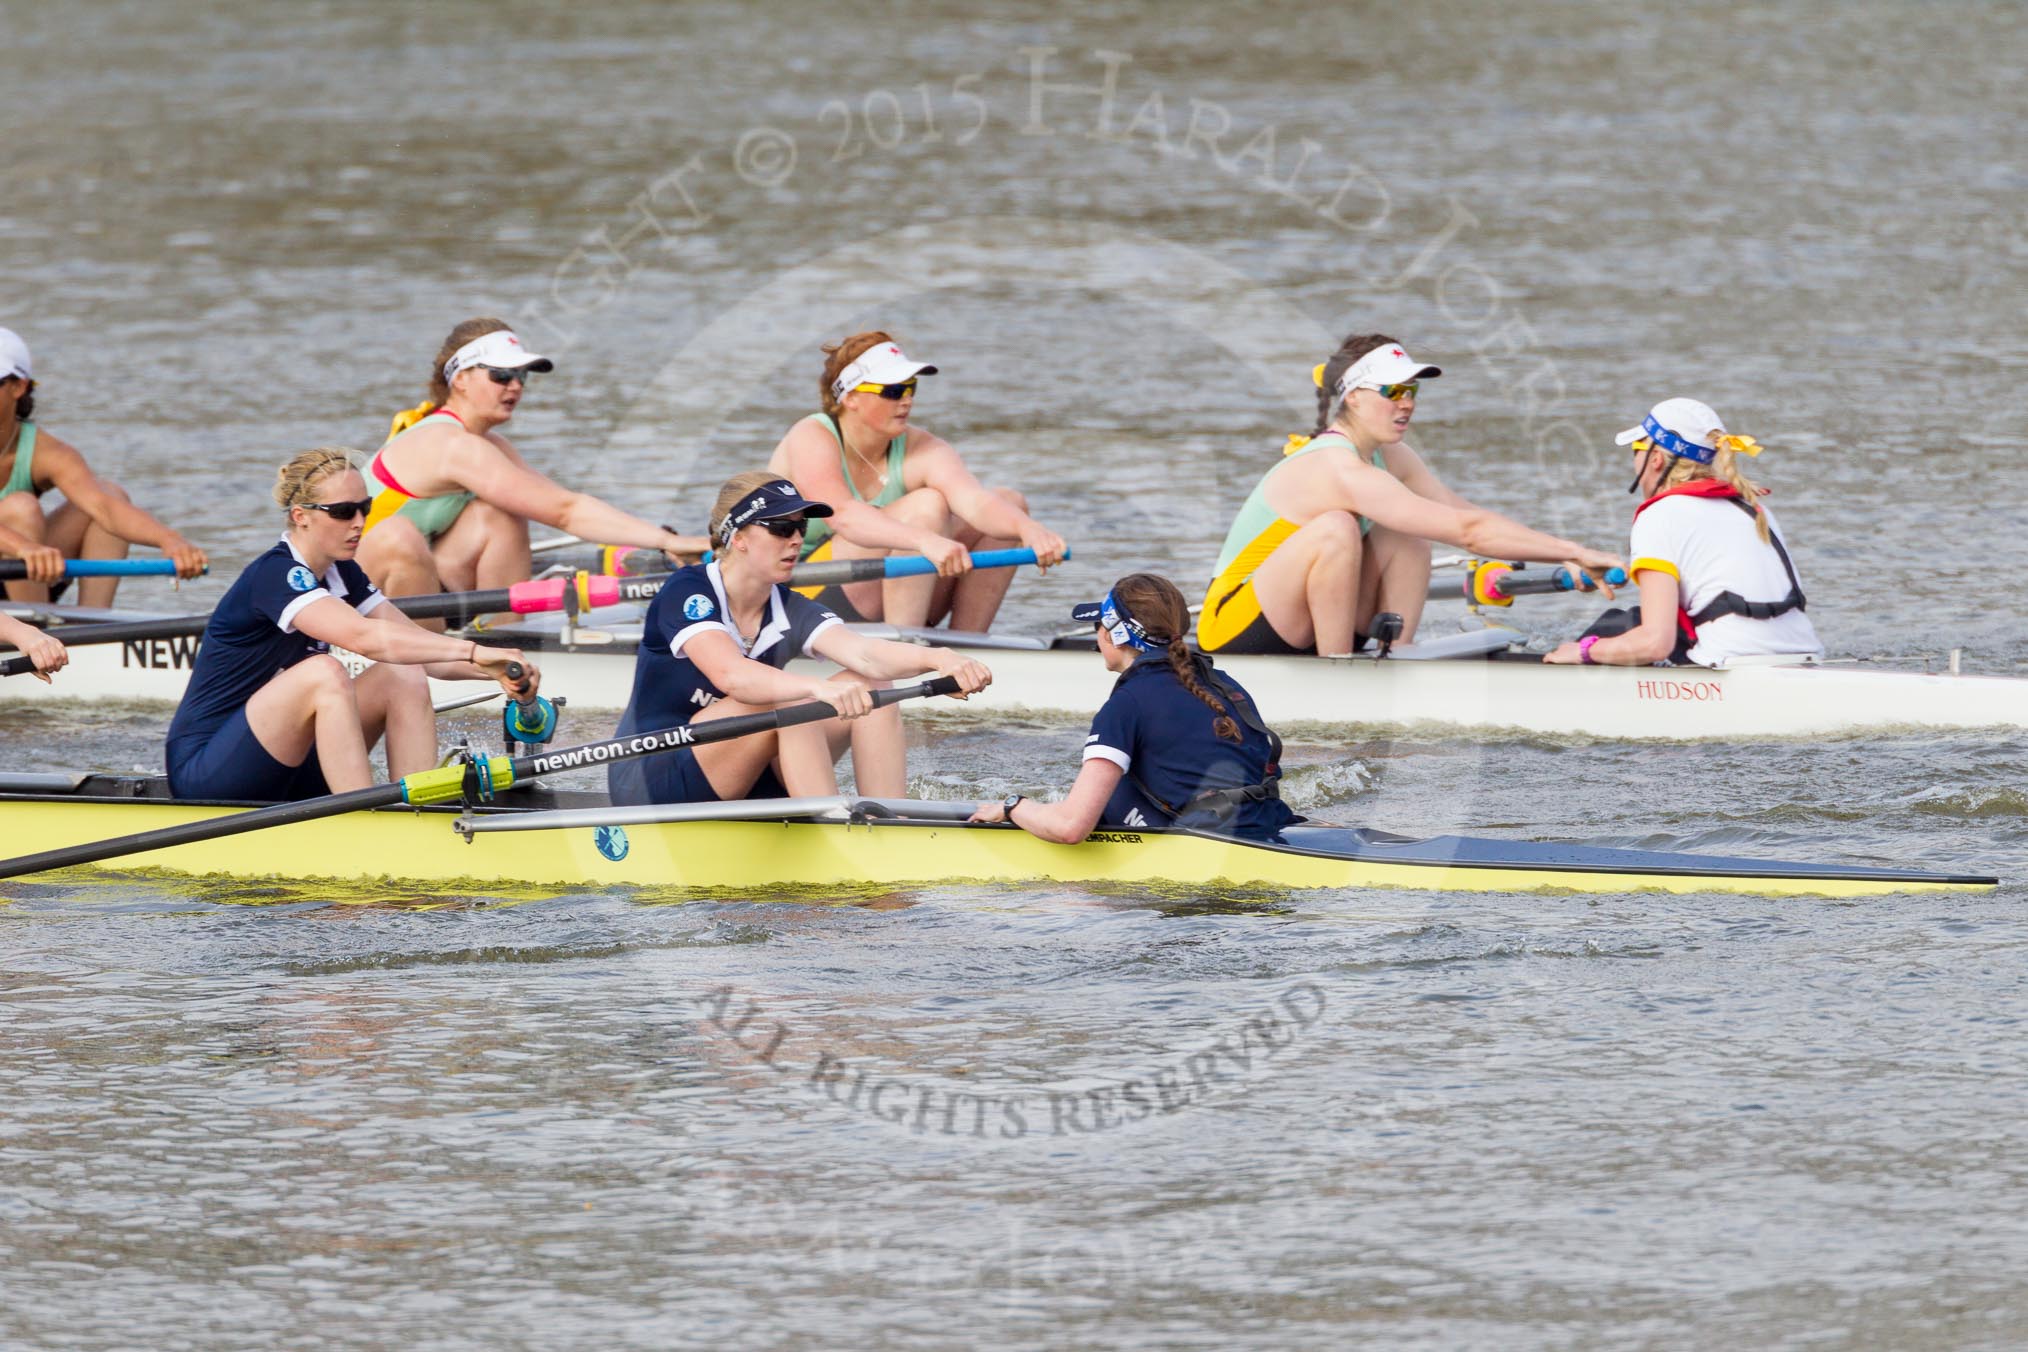 The Boat Race season 2015 - Newton Women's Boat Race.
River Thames between Putney and Mortlake,
London,

United Kingdom,
on 10 April 2015 at 16:03, image #125